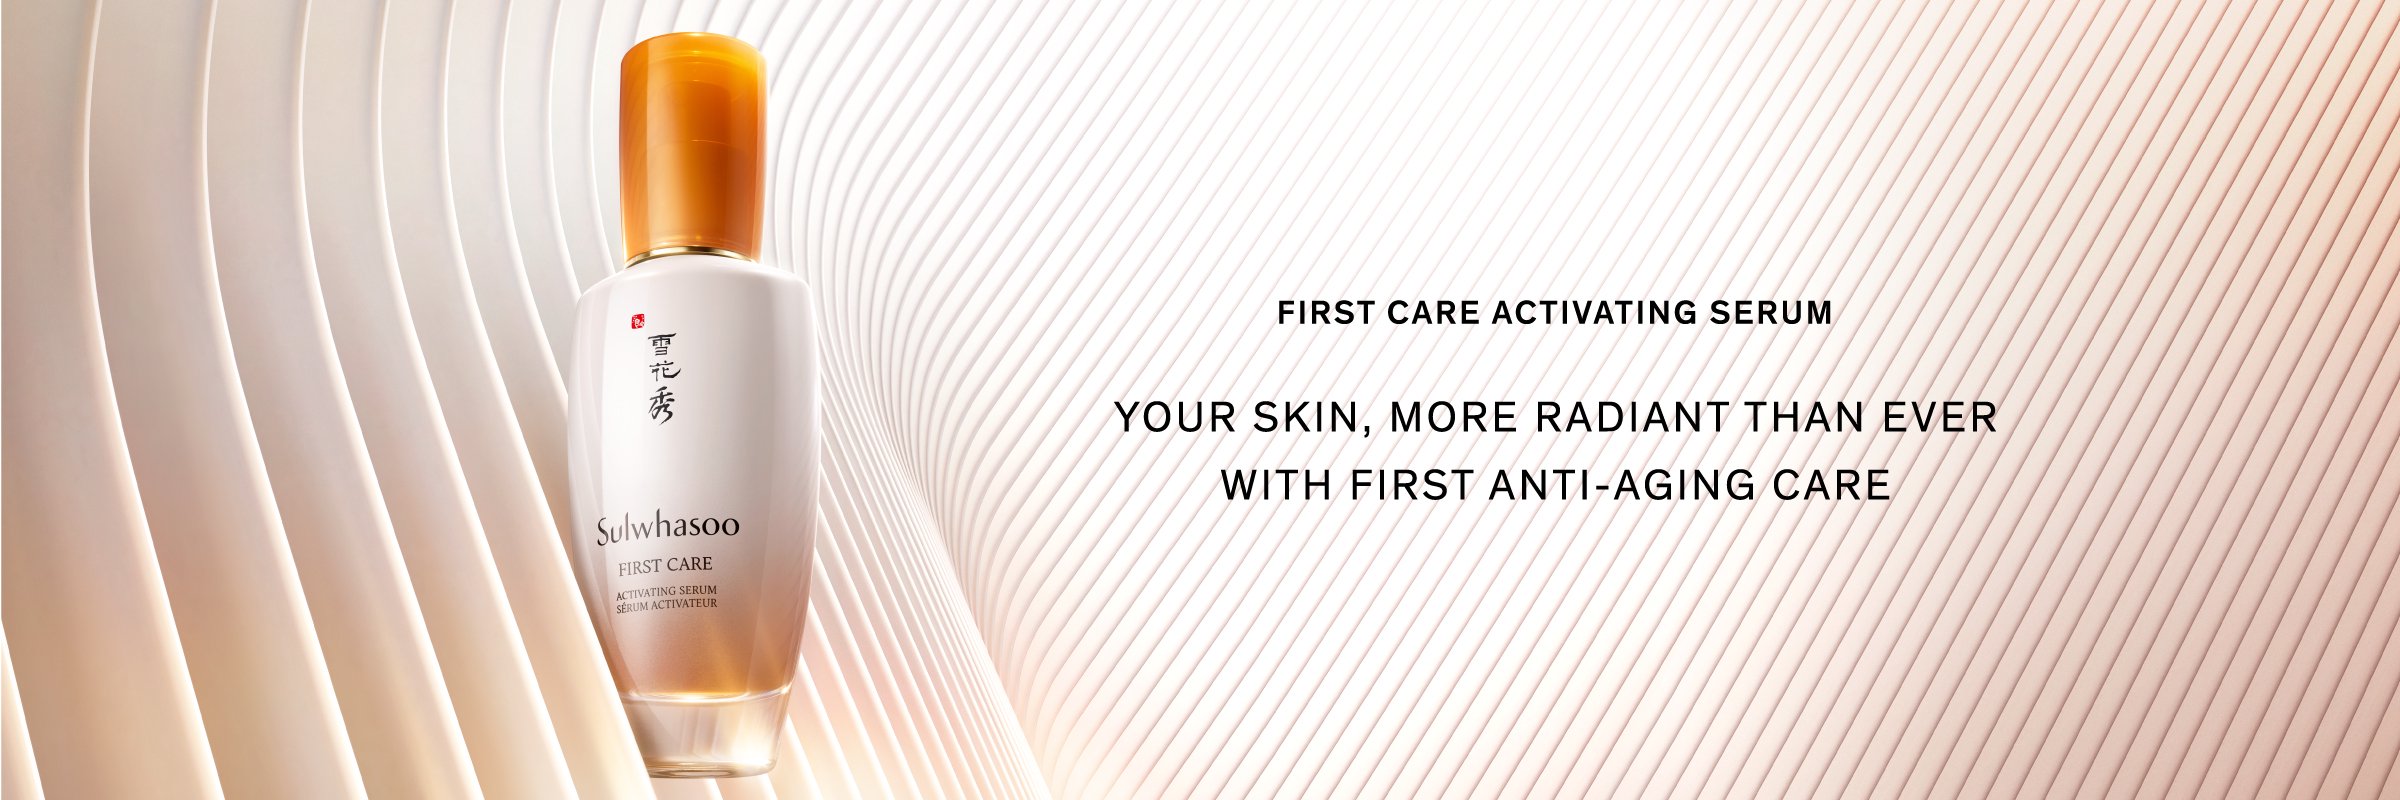 Sulwhasoo - First Care Activating Serum EX